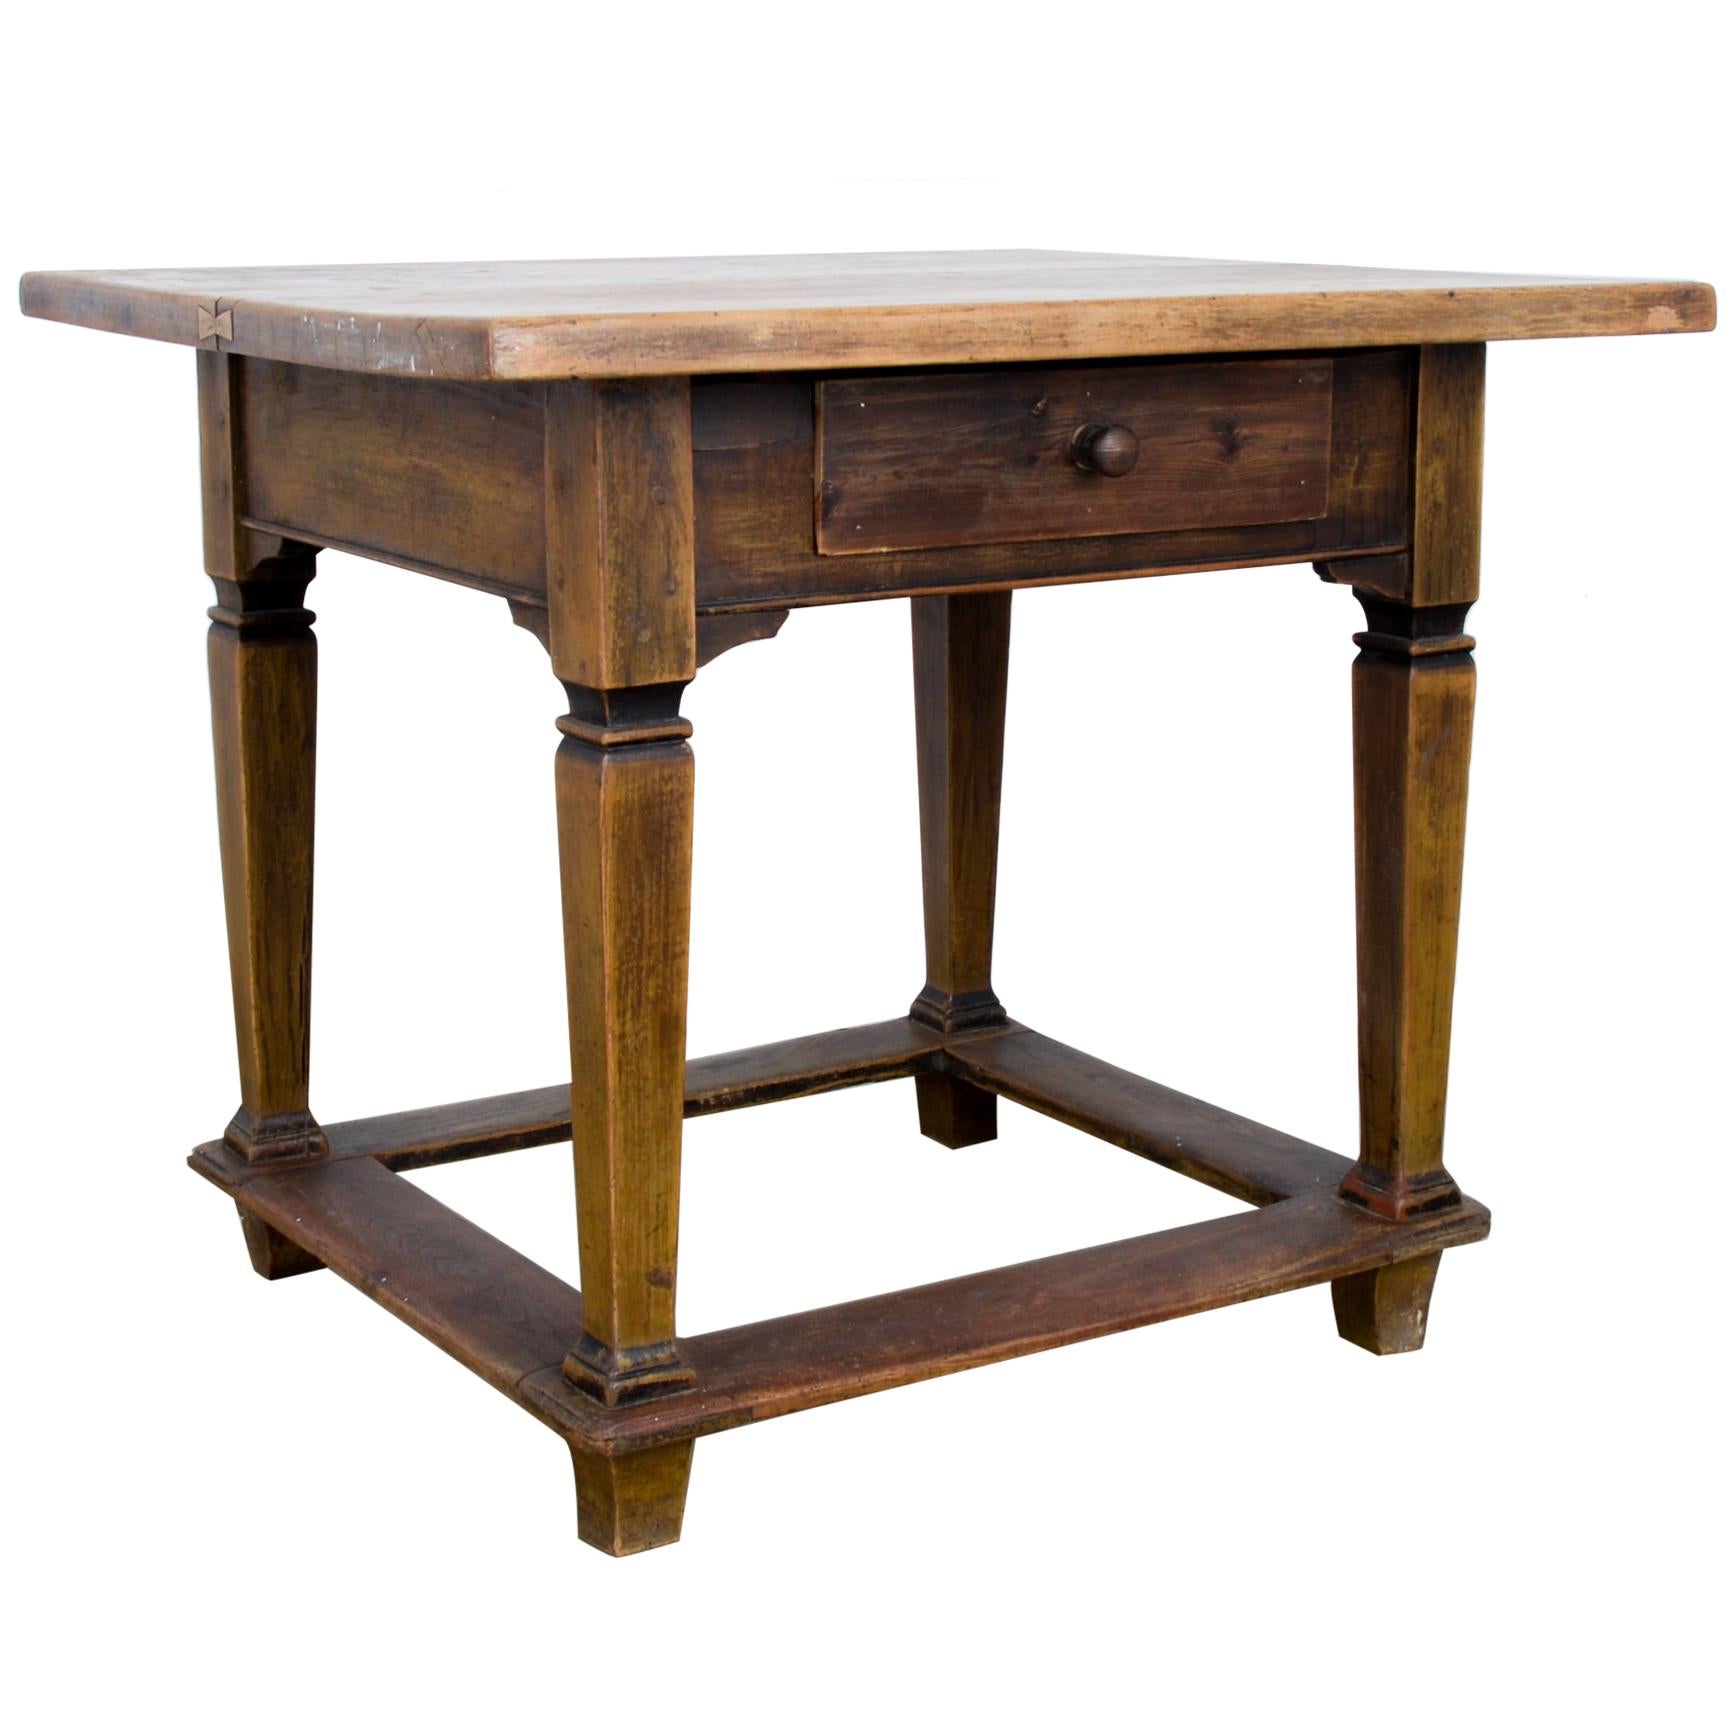 Late 19th Century Central European Wood Table